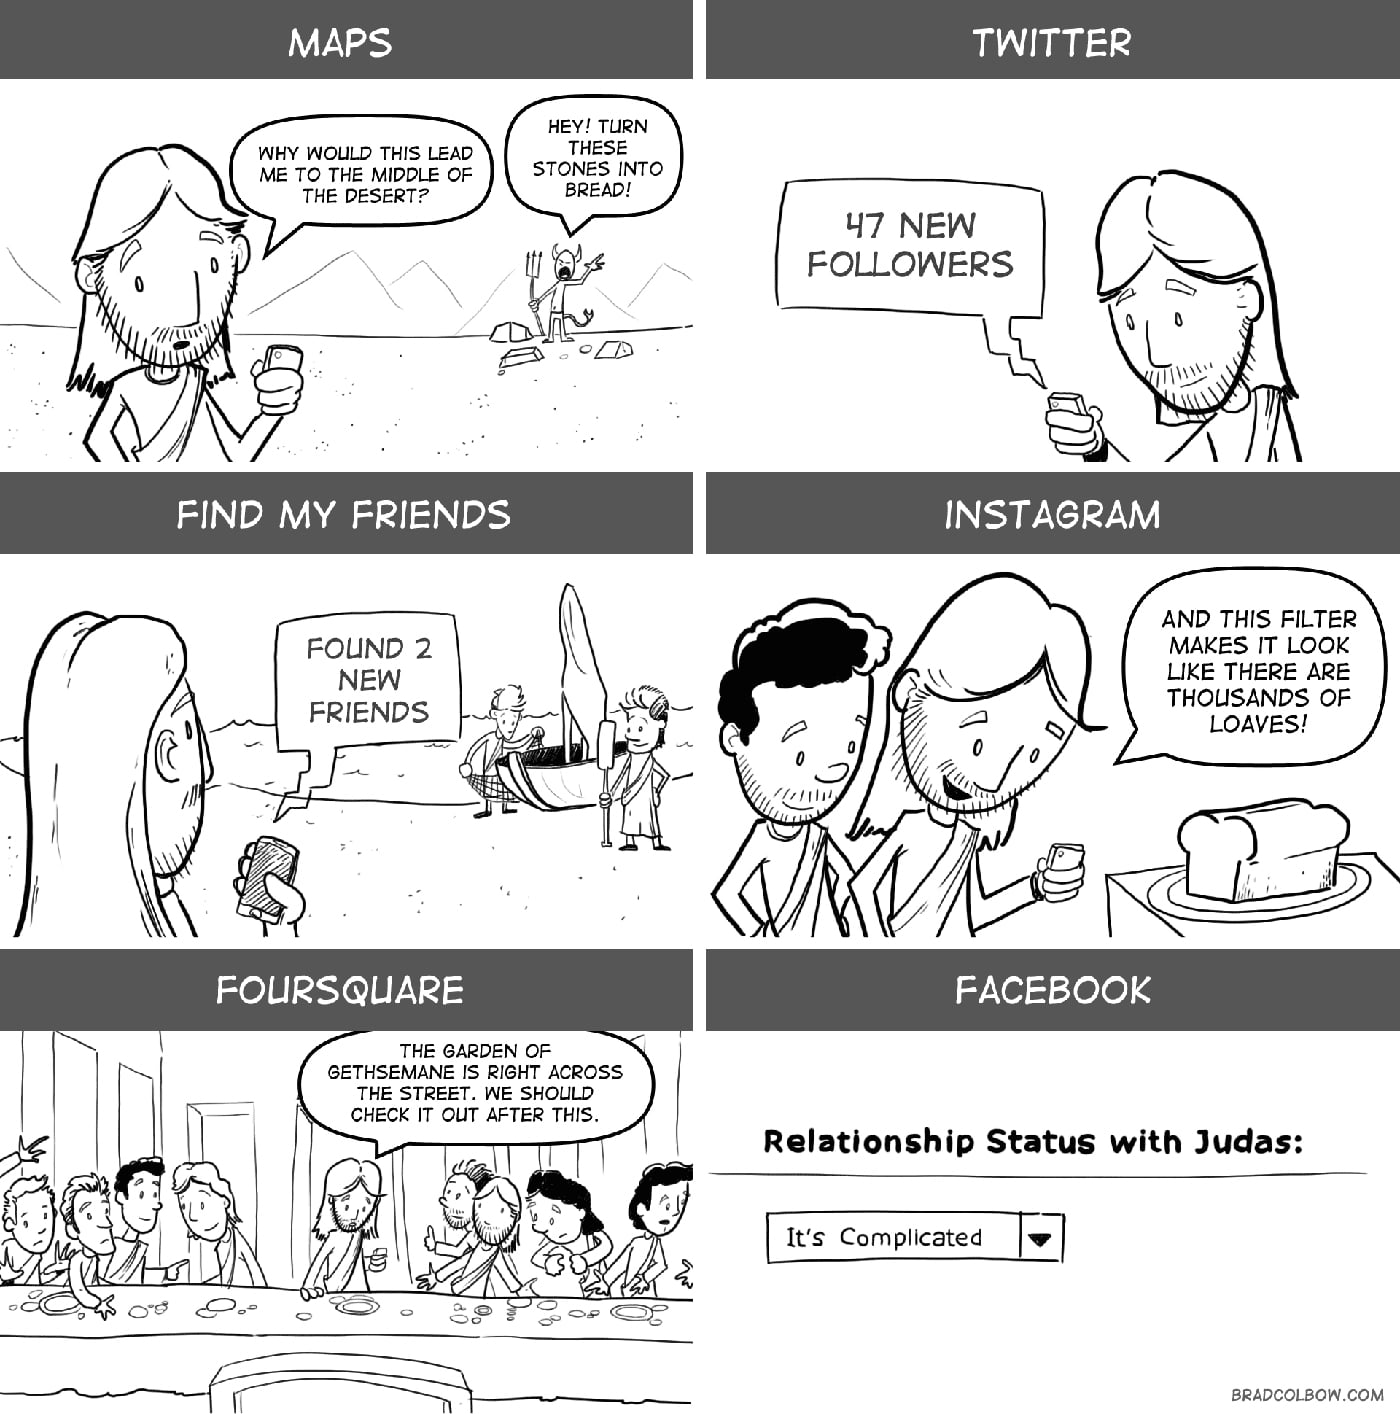 If Jesus Had An iPhone & Joined Twitter [Comic]